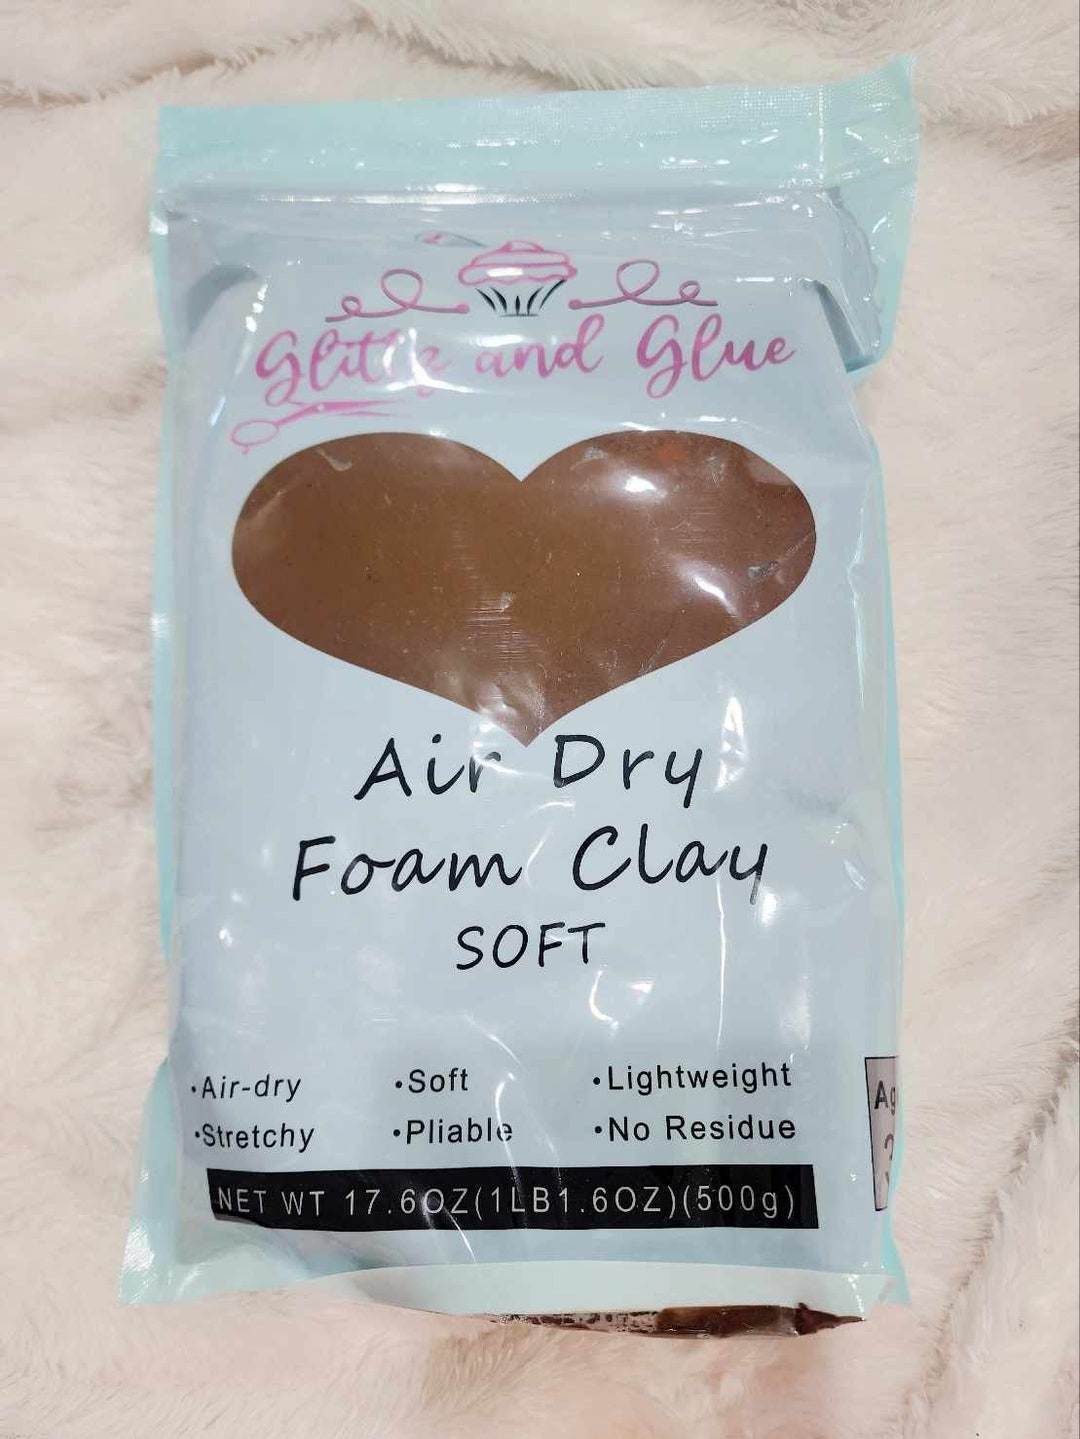 Full Review of the Glittz and Glue Air Dry Foam Clay to Make Kid